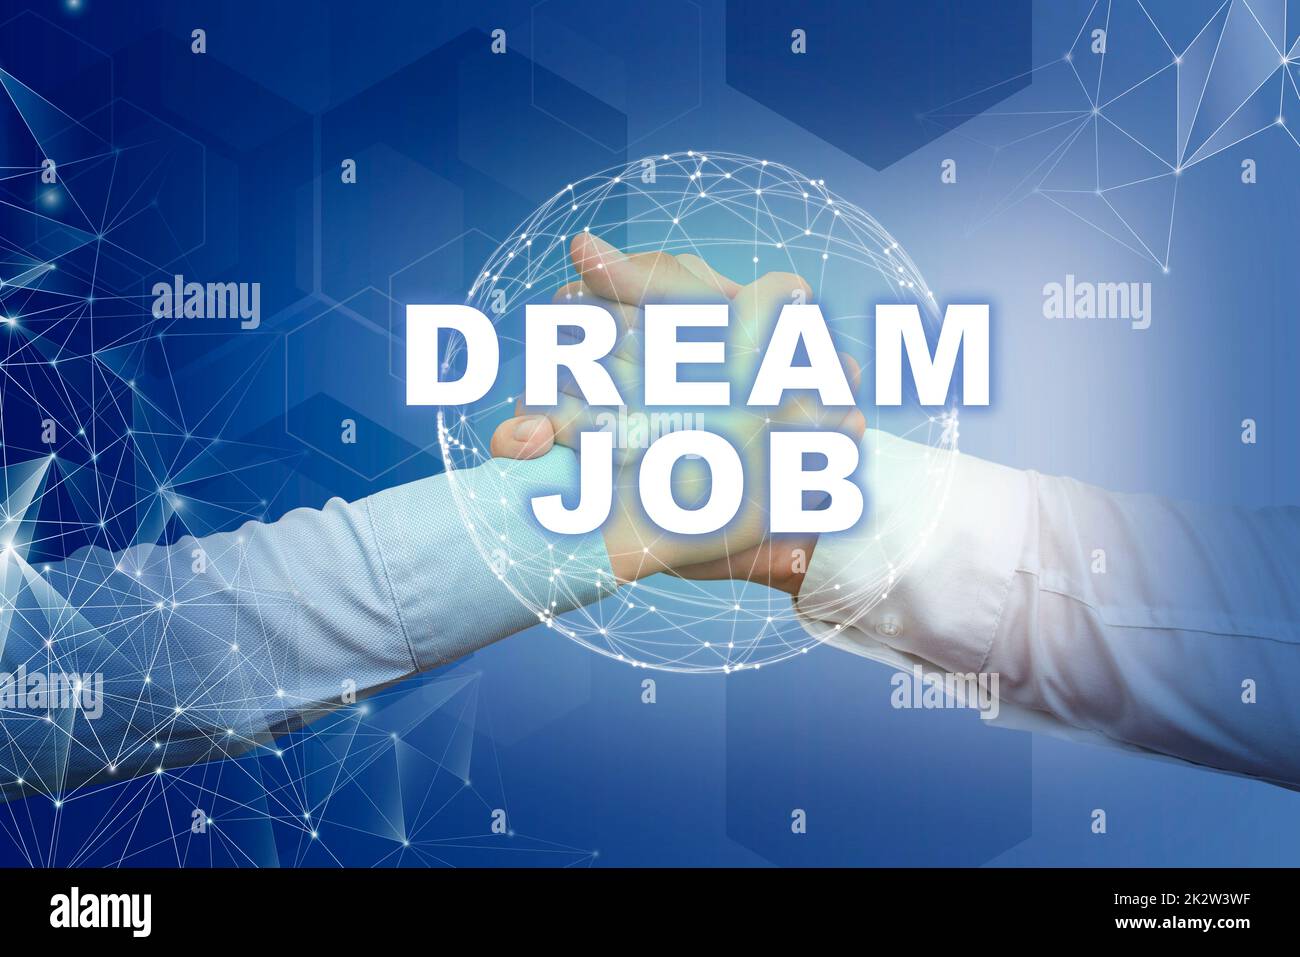 Sign displaying Dream Job. Business idea An act that is paid of by salary and giving you hapiness Hands shaking symbolizing globalization presenting teamwork. Stock Photo